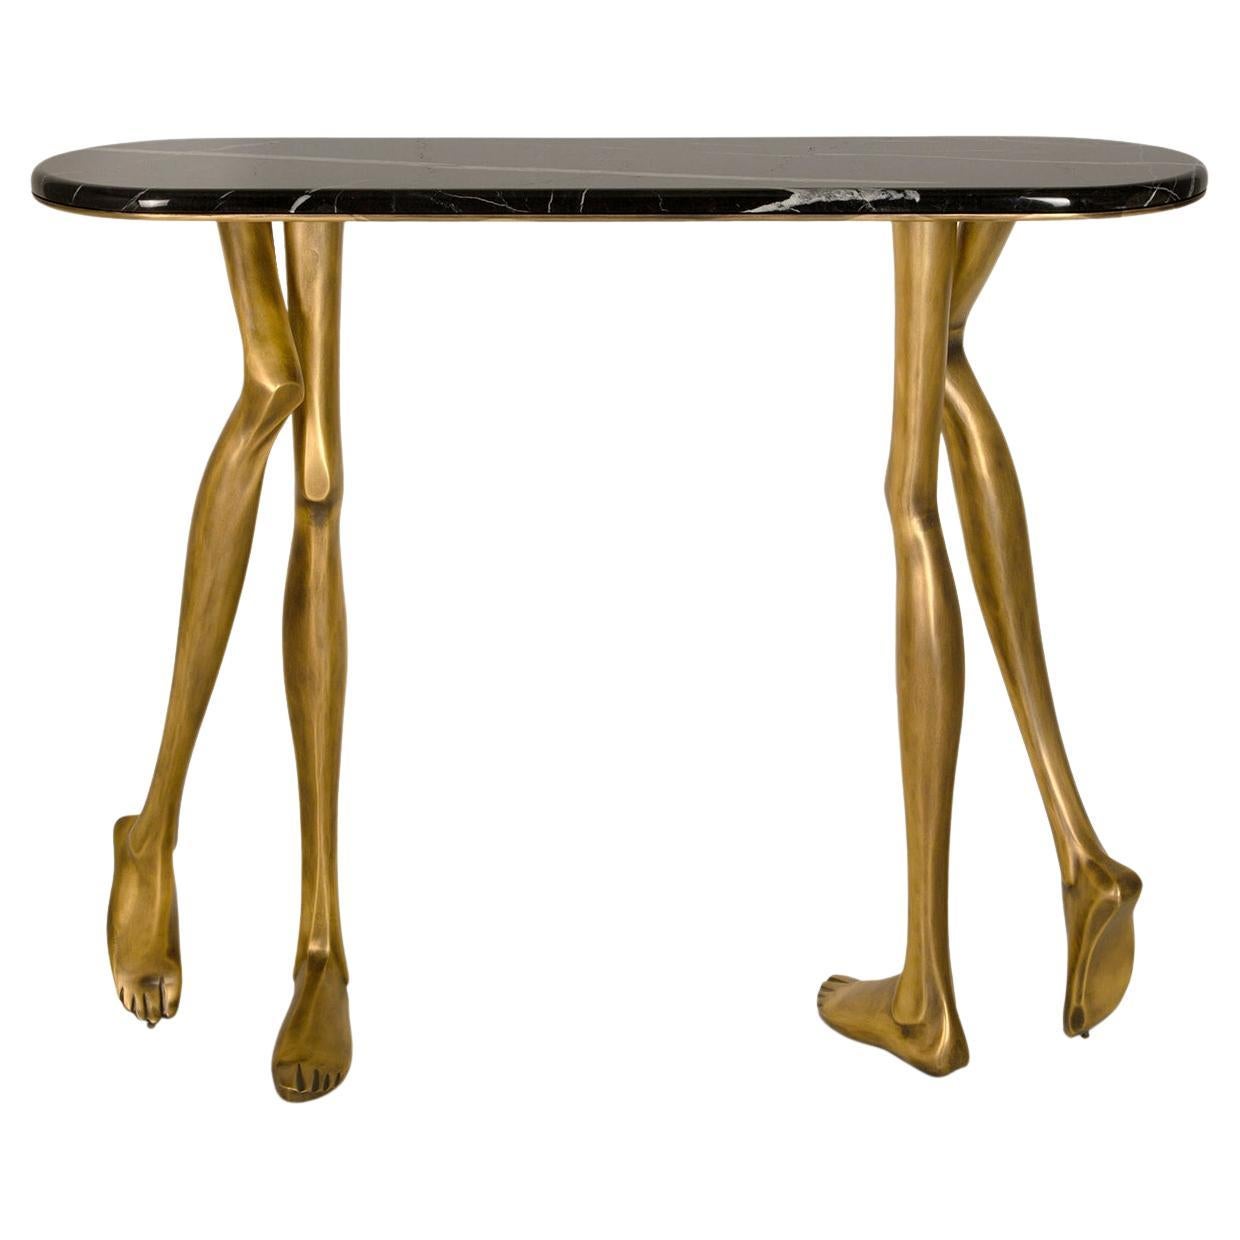 Monroe Console Table with Oxidized Brushed Brass and a Nero Marquina Marble Top